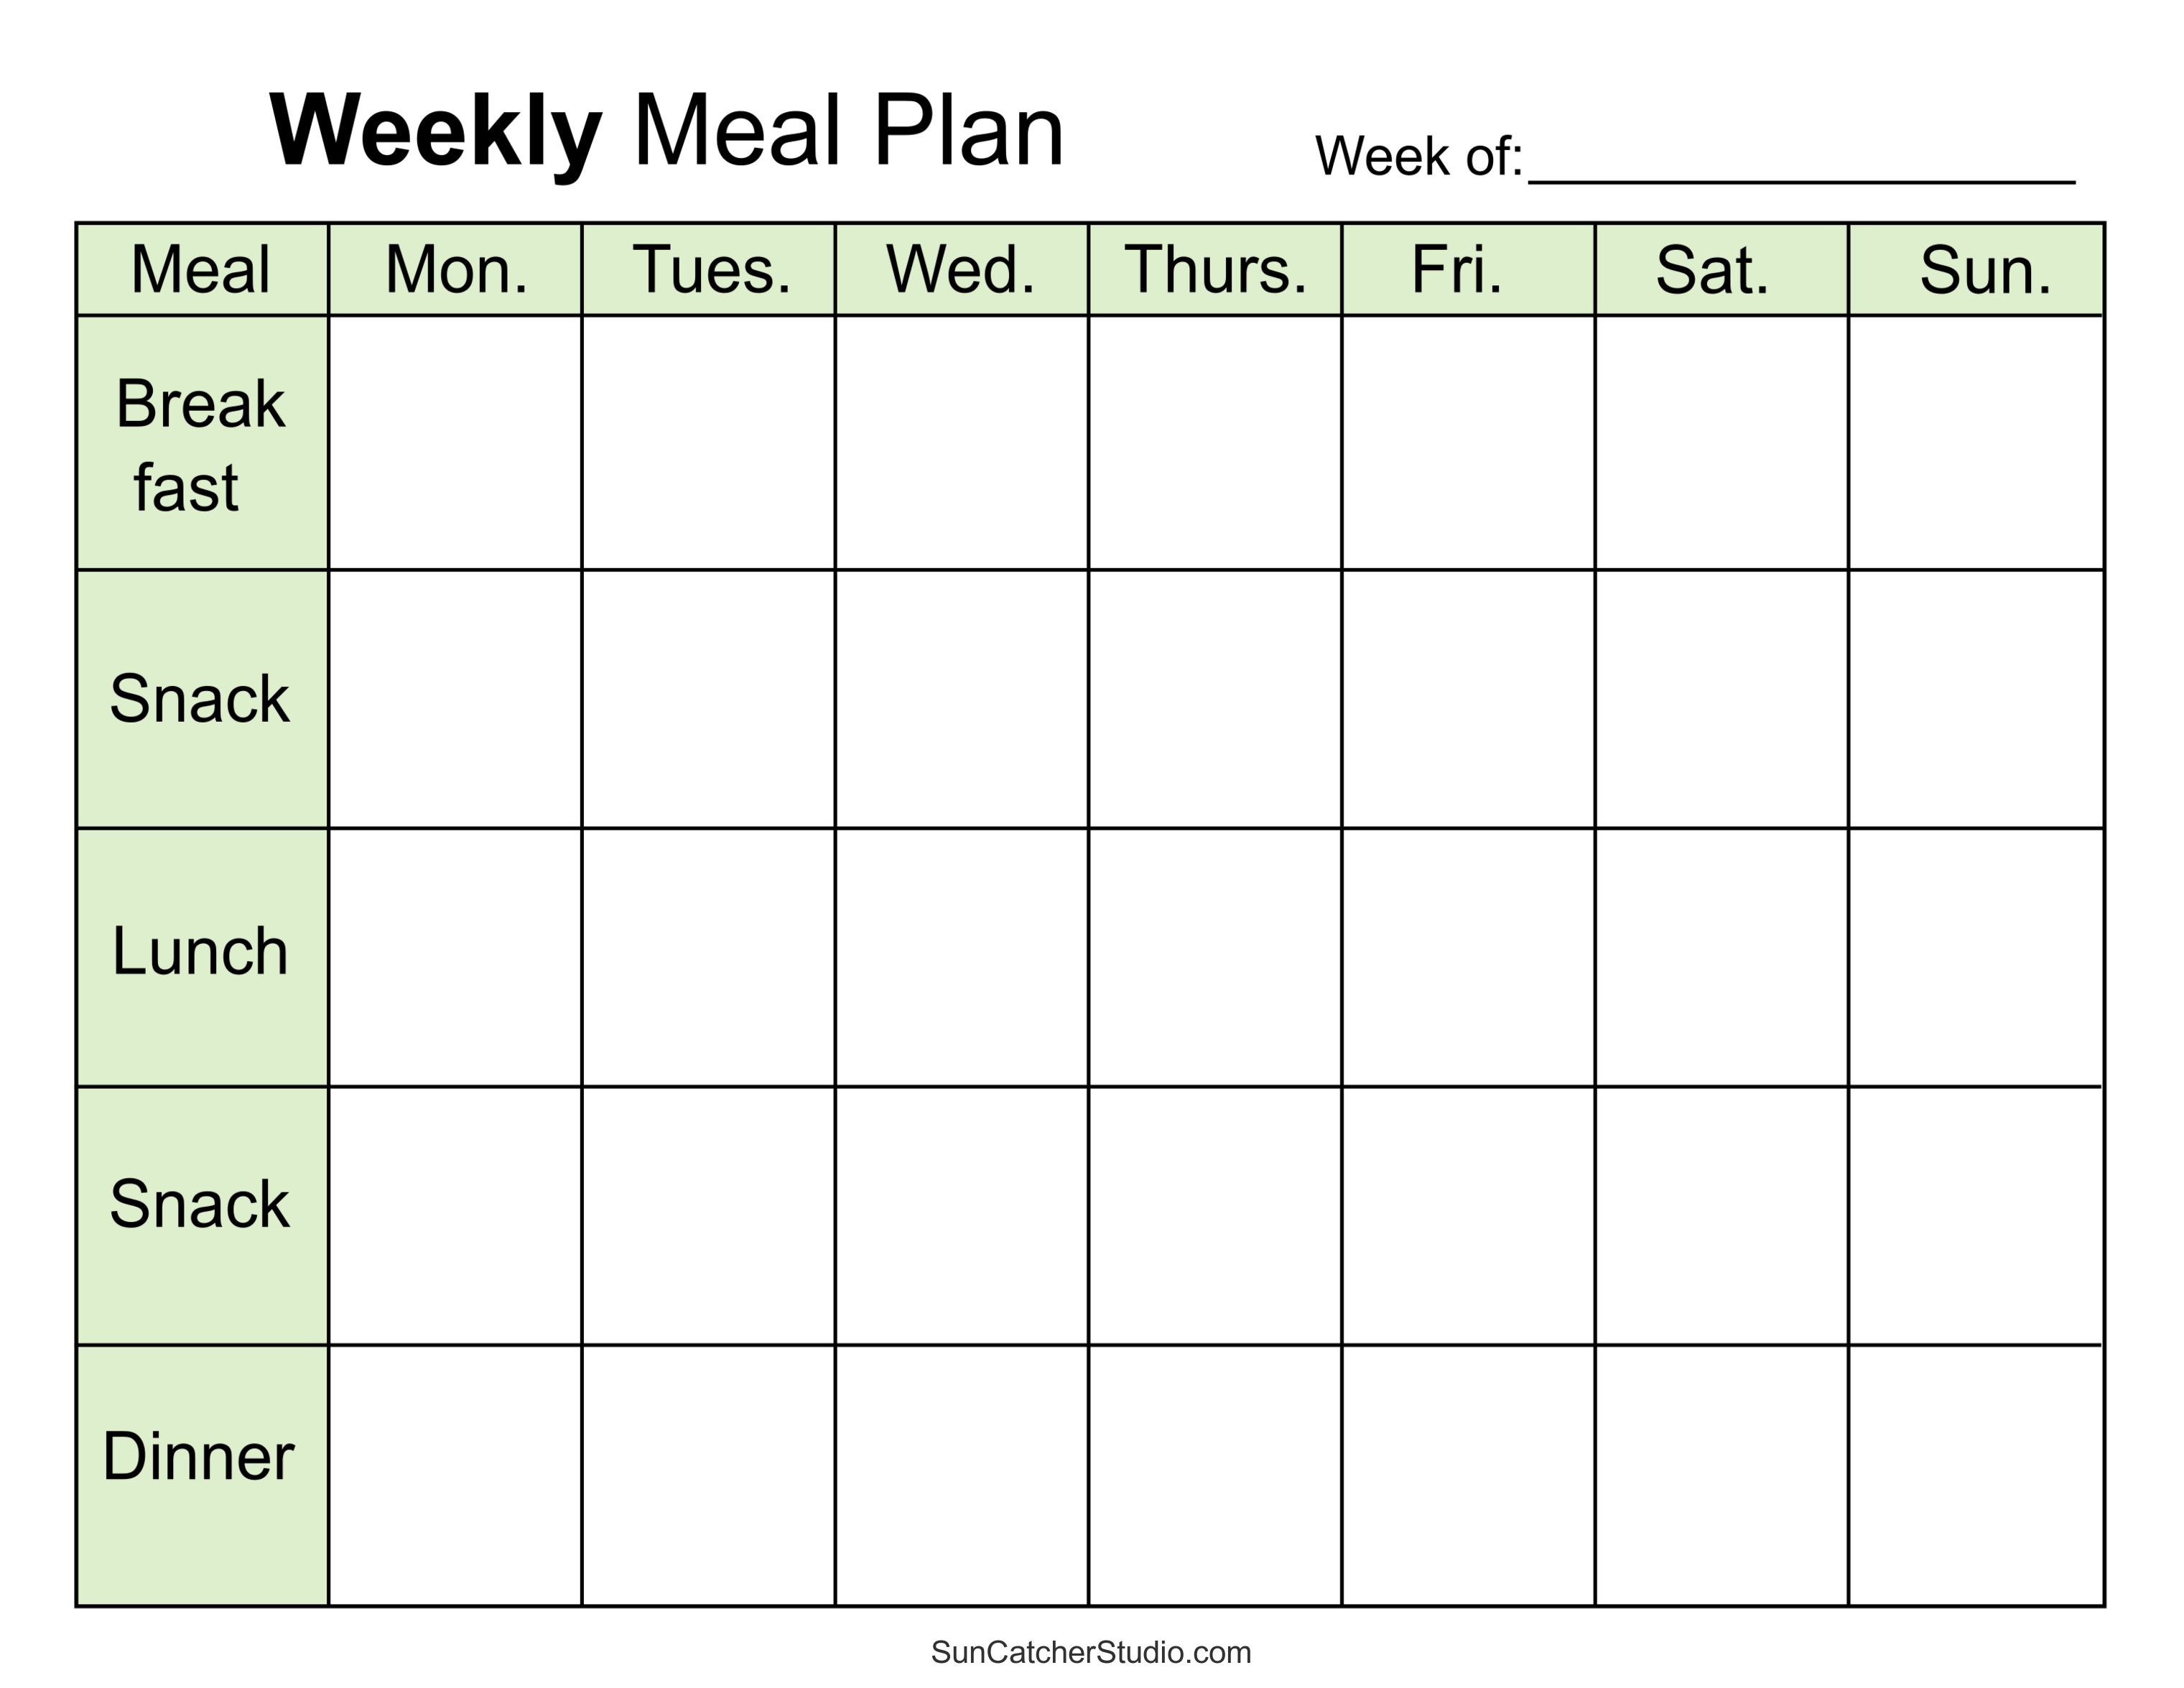 Meal Planners: Printable Weekly Menu Templates (PDF) – DIY Projects ...